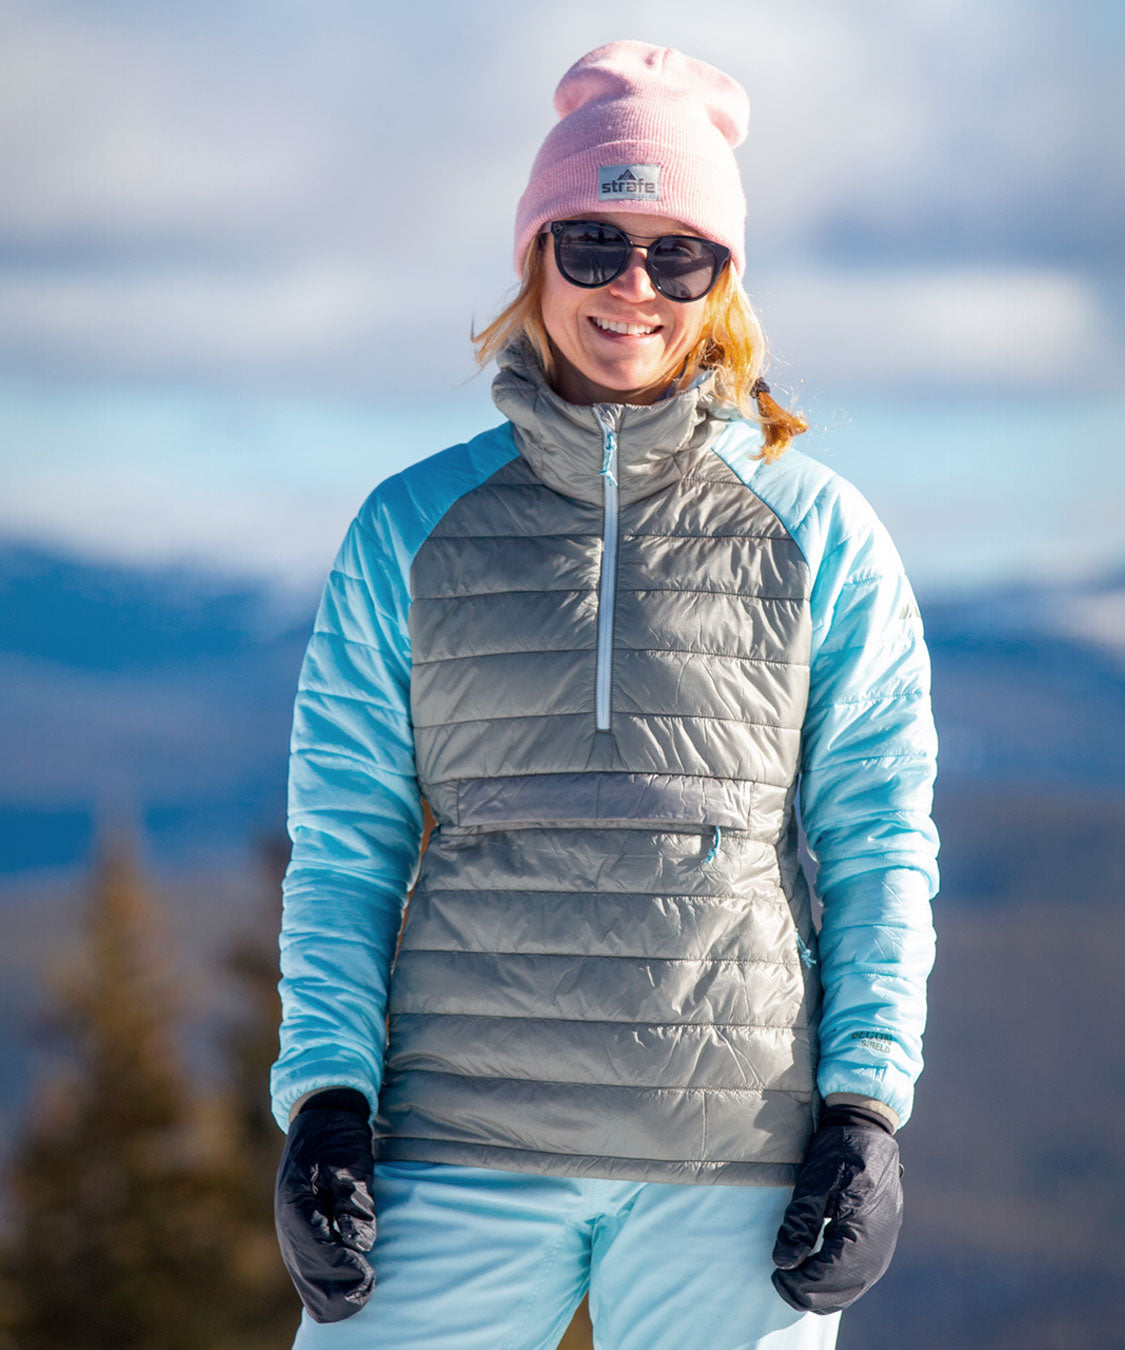 woman in aero pullover standing in snow